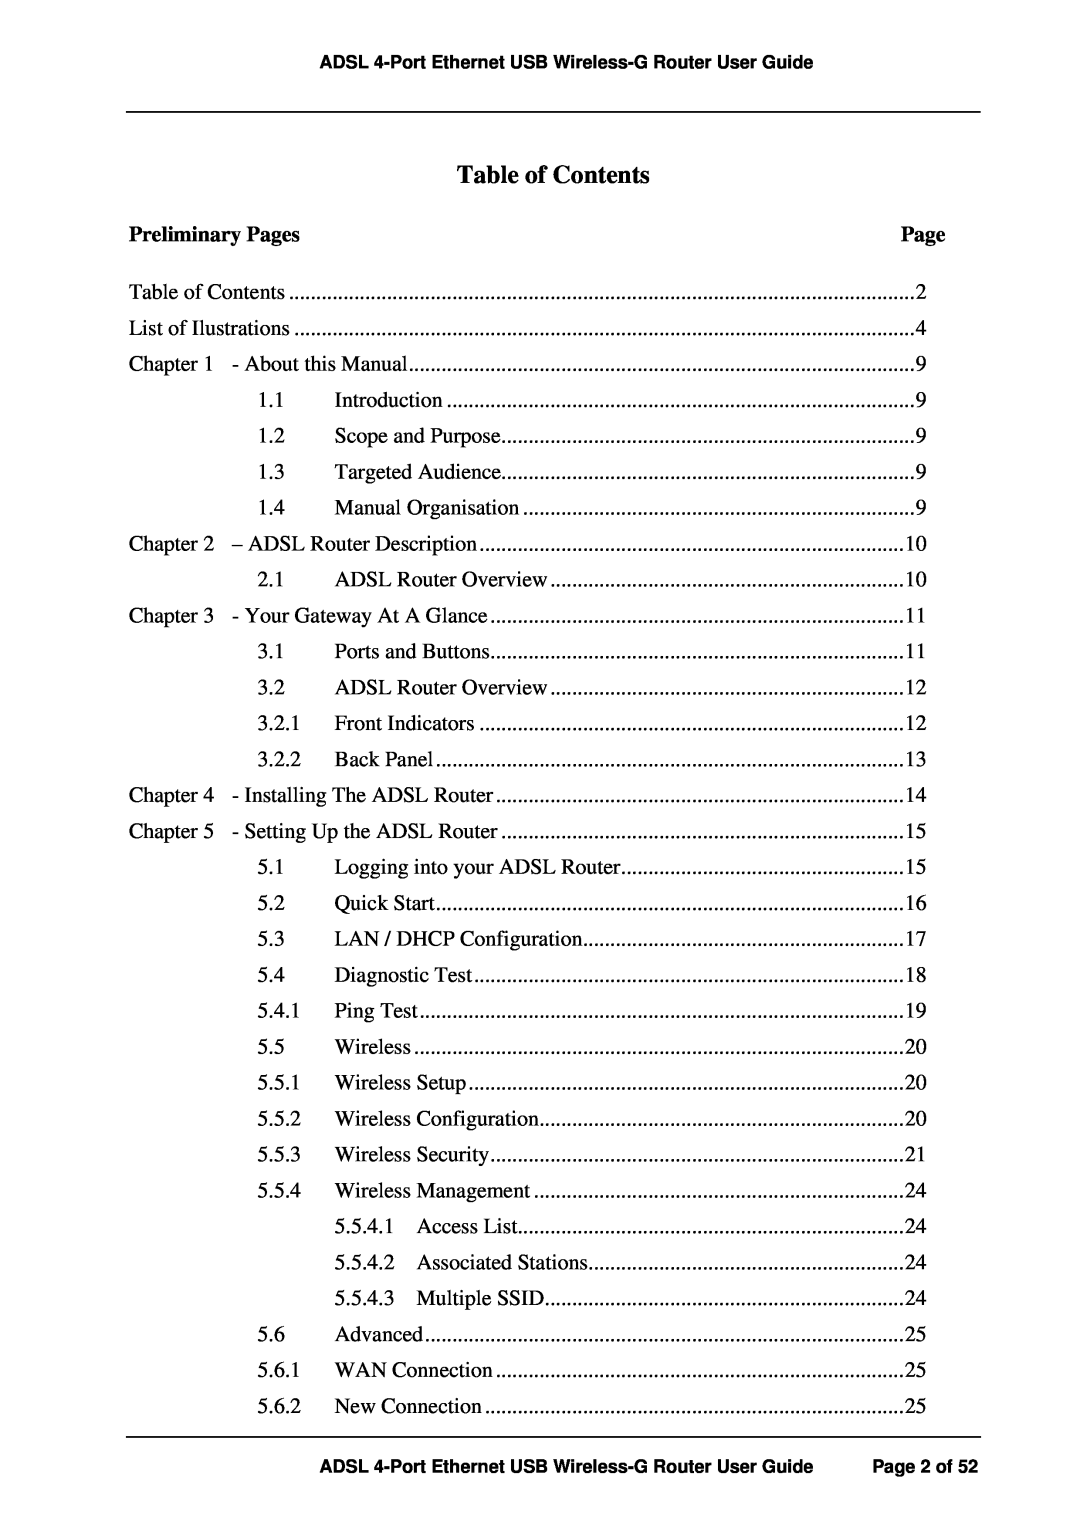 APC ADSL 4-Port manual Table of Contents, Preliminary Pages 